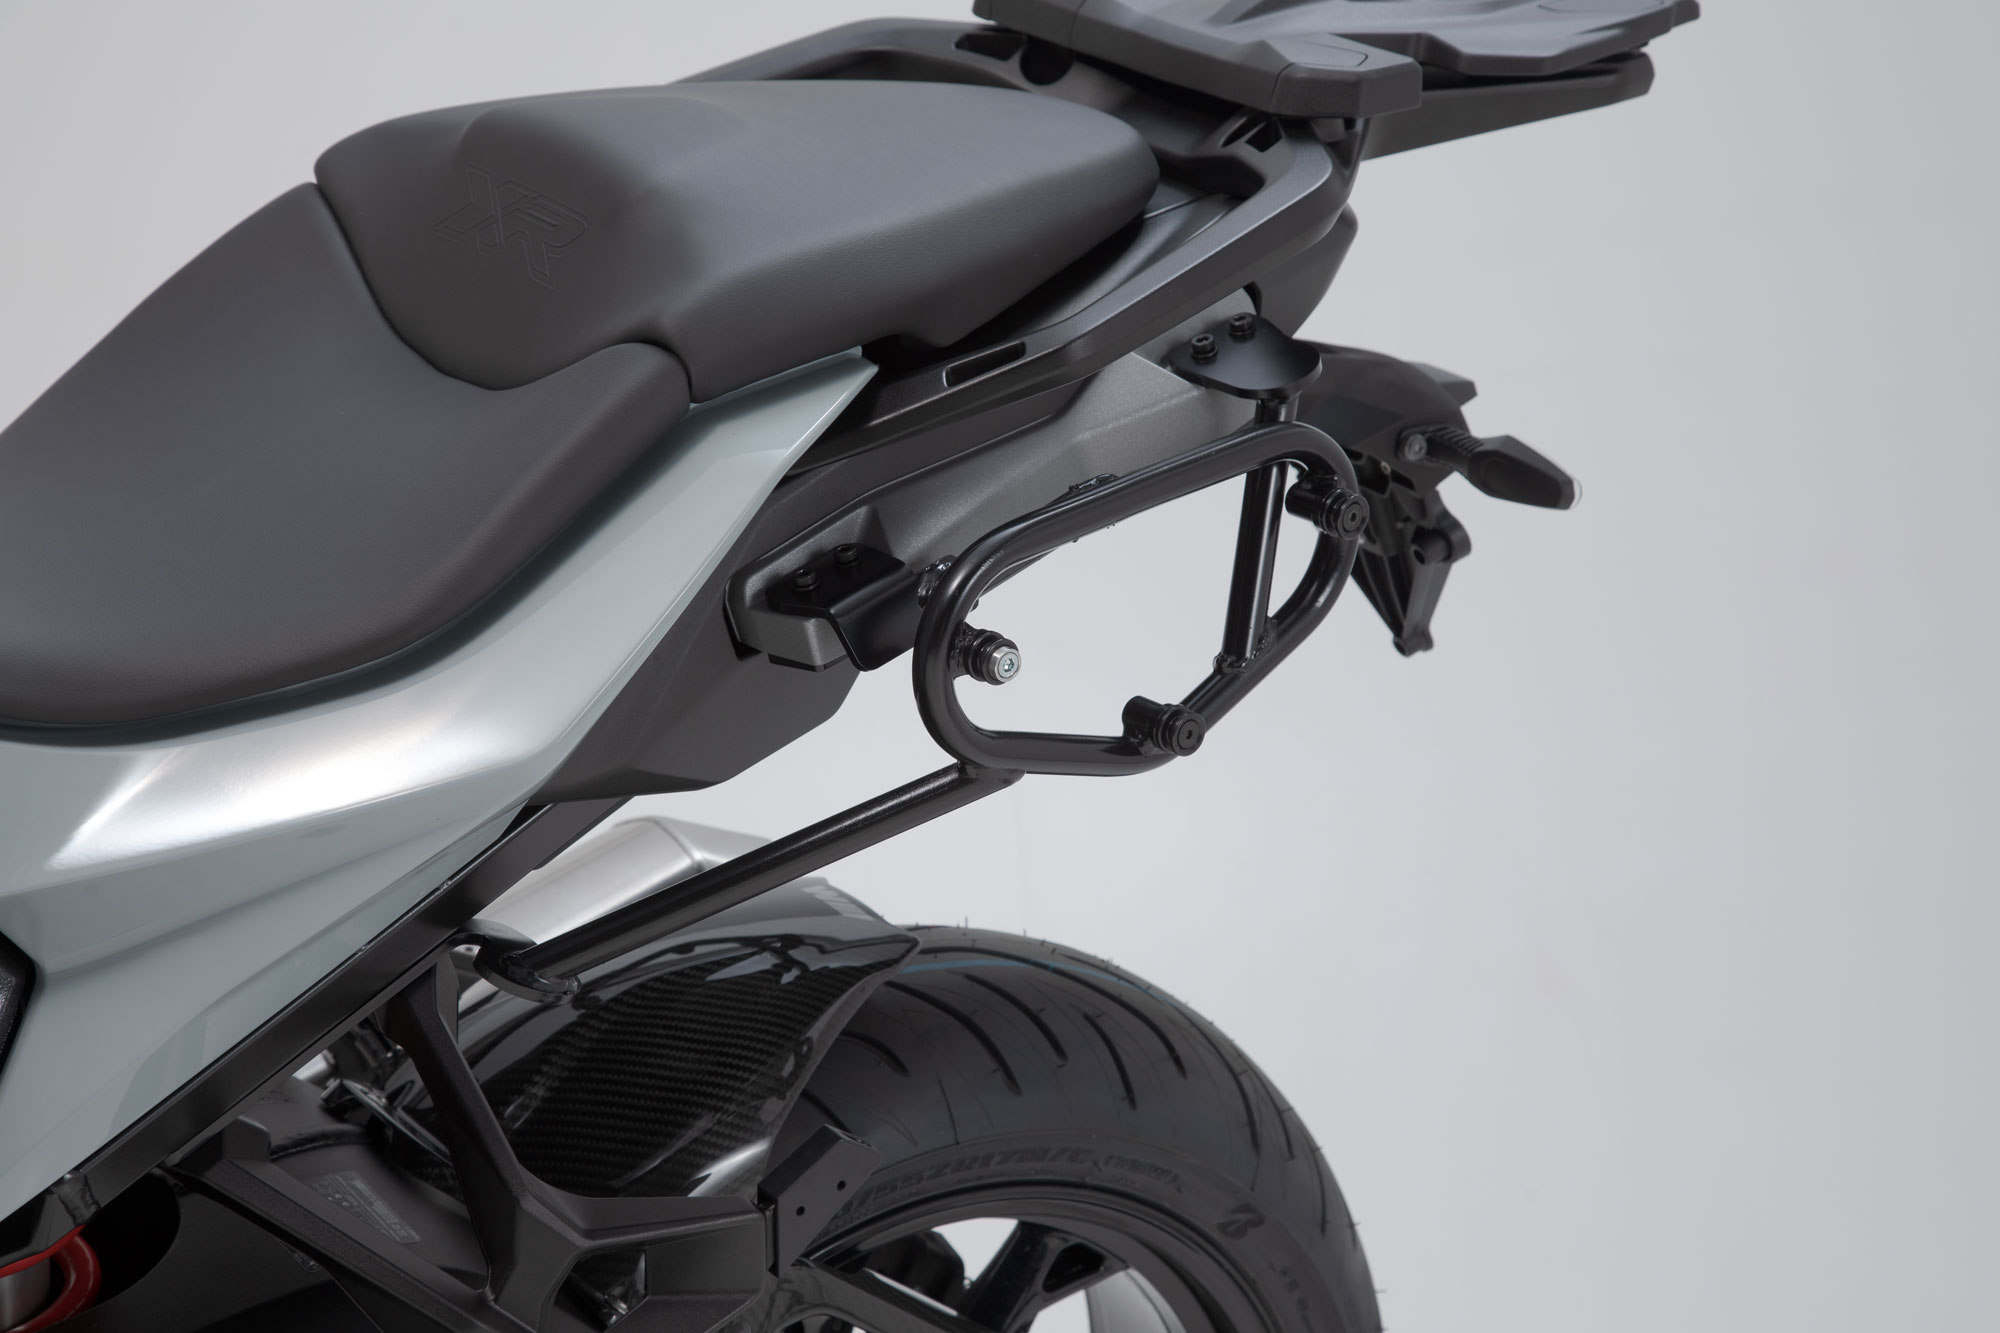 Accessories for the BMW S 1000 XR from SW-MOTECH